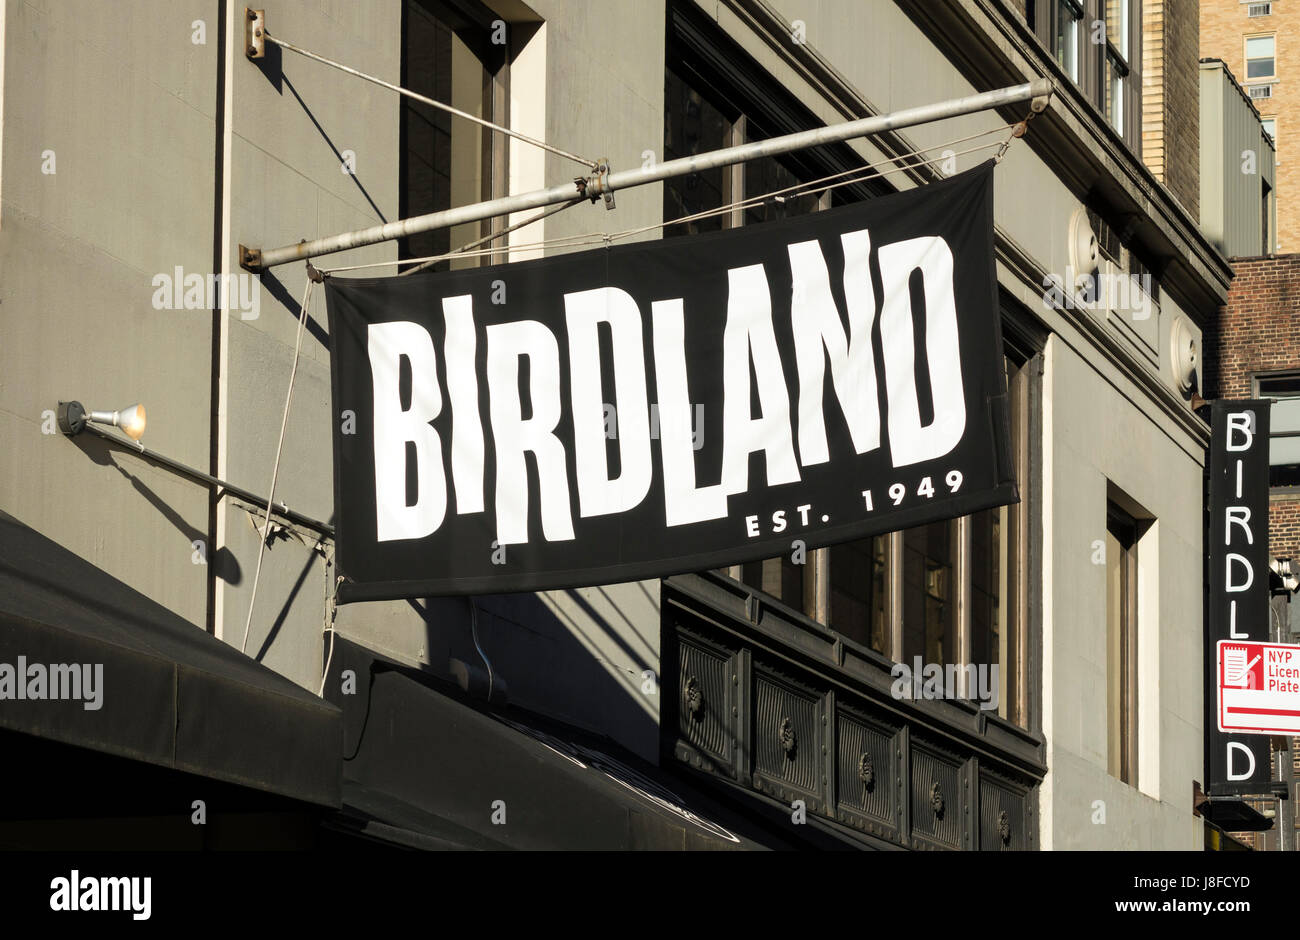 Birdland, the famous jazz club named for Charlie Parker in New York City Stock Photo